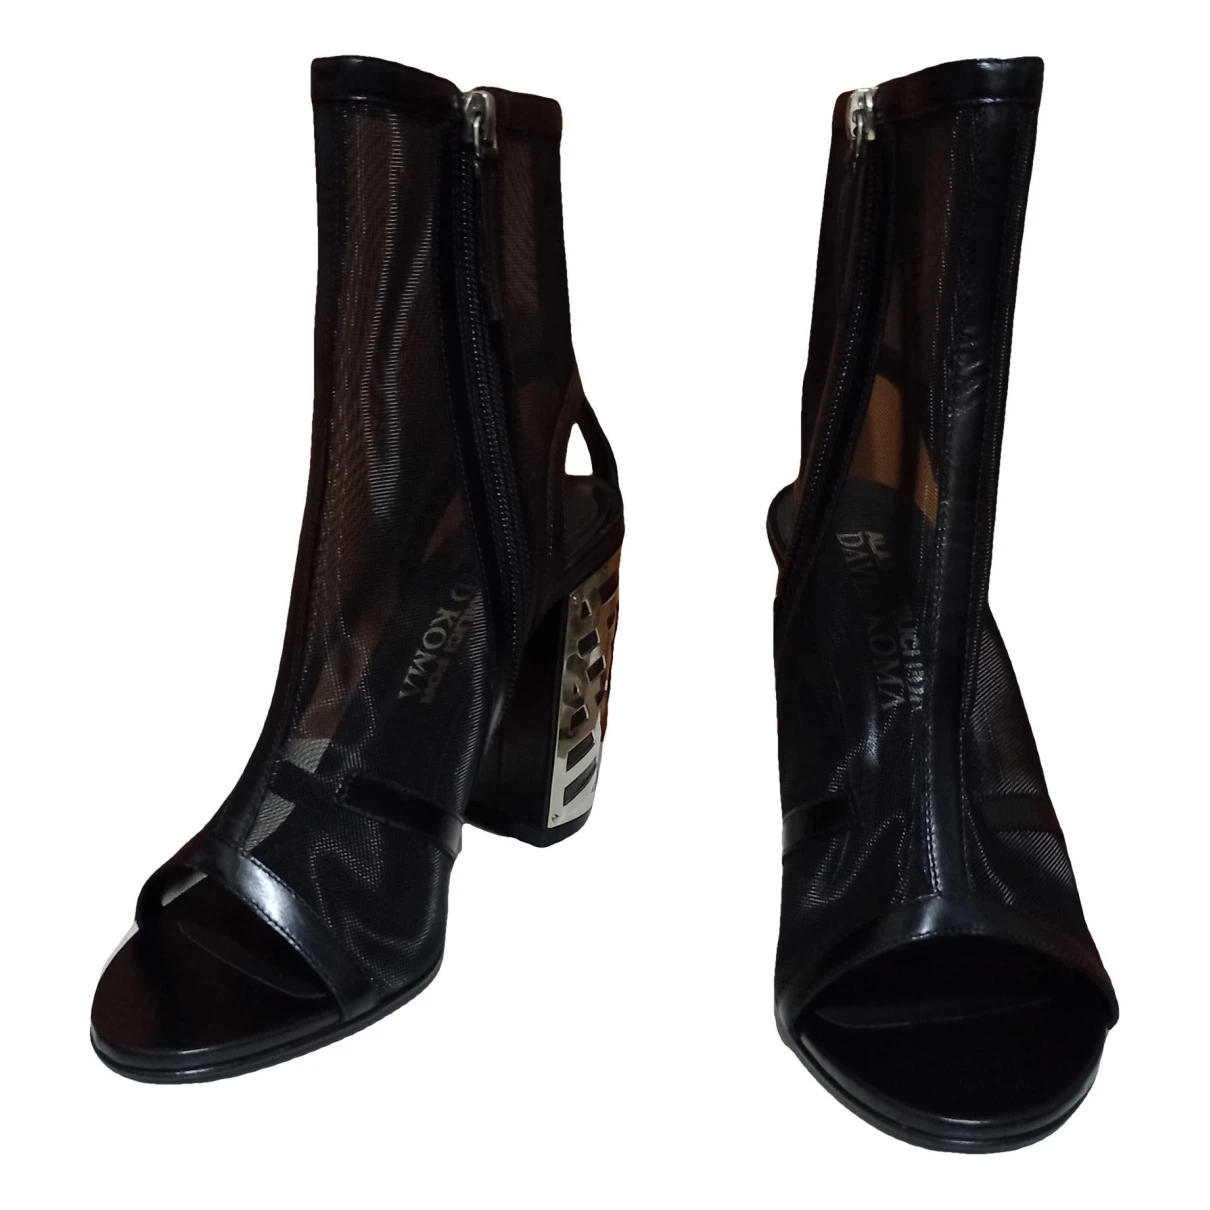 shoes David Koma boots for Female Polyester 39 EU. Used condition